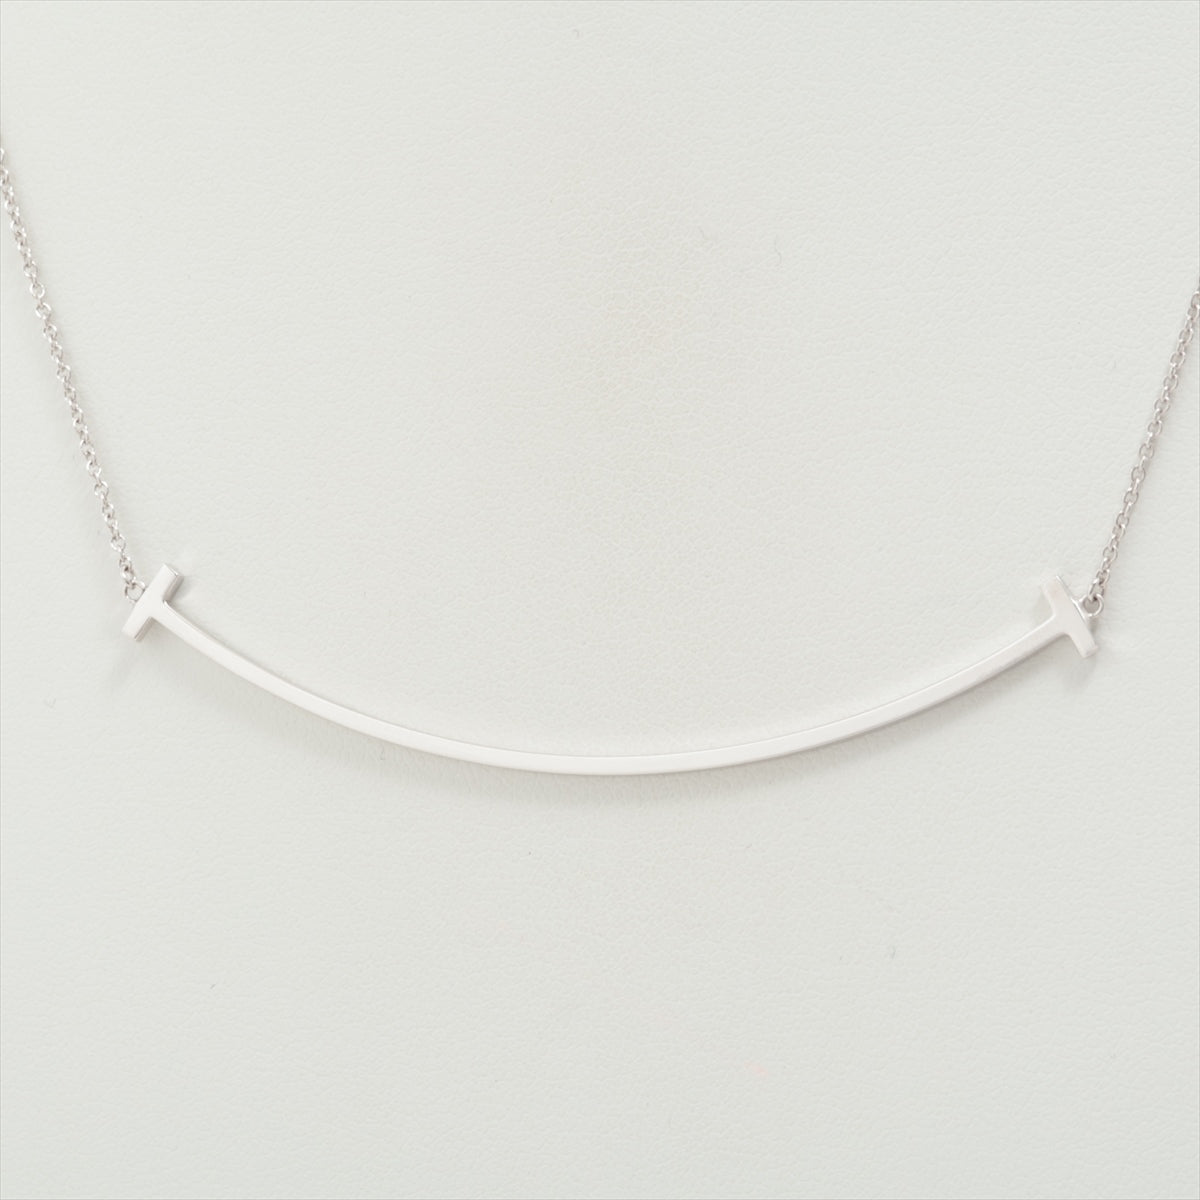 Tiffany T Smile  Necklace 750 (WG) 3.9g